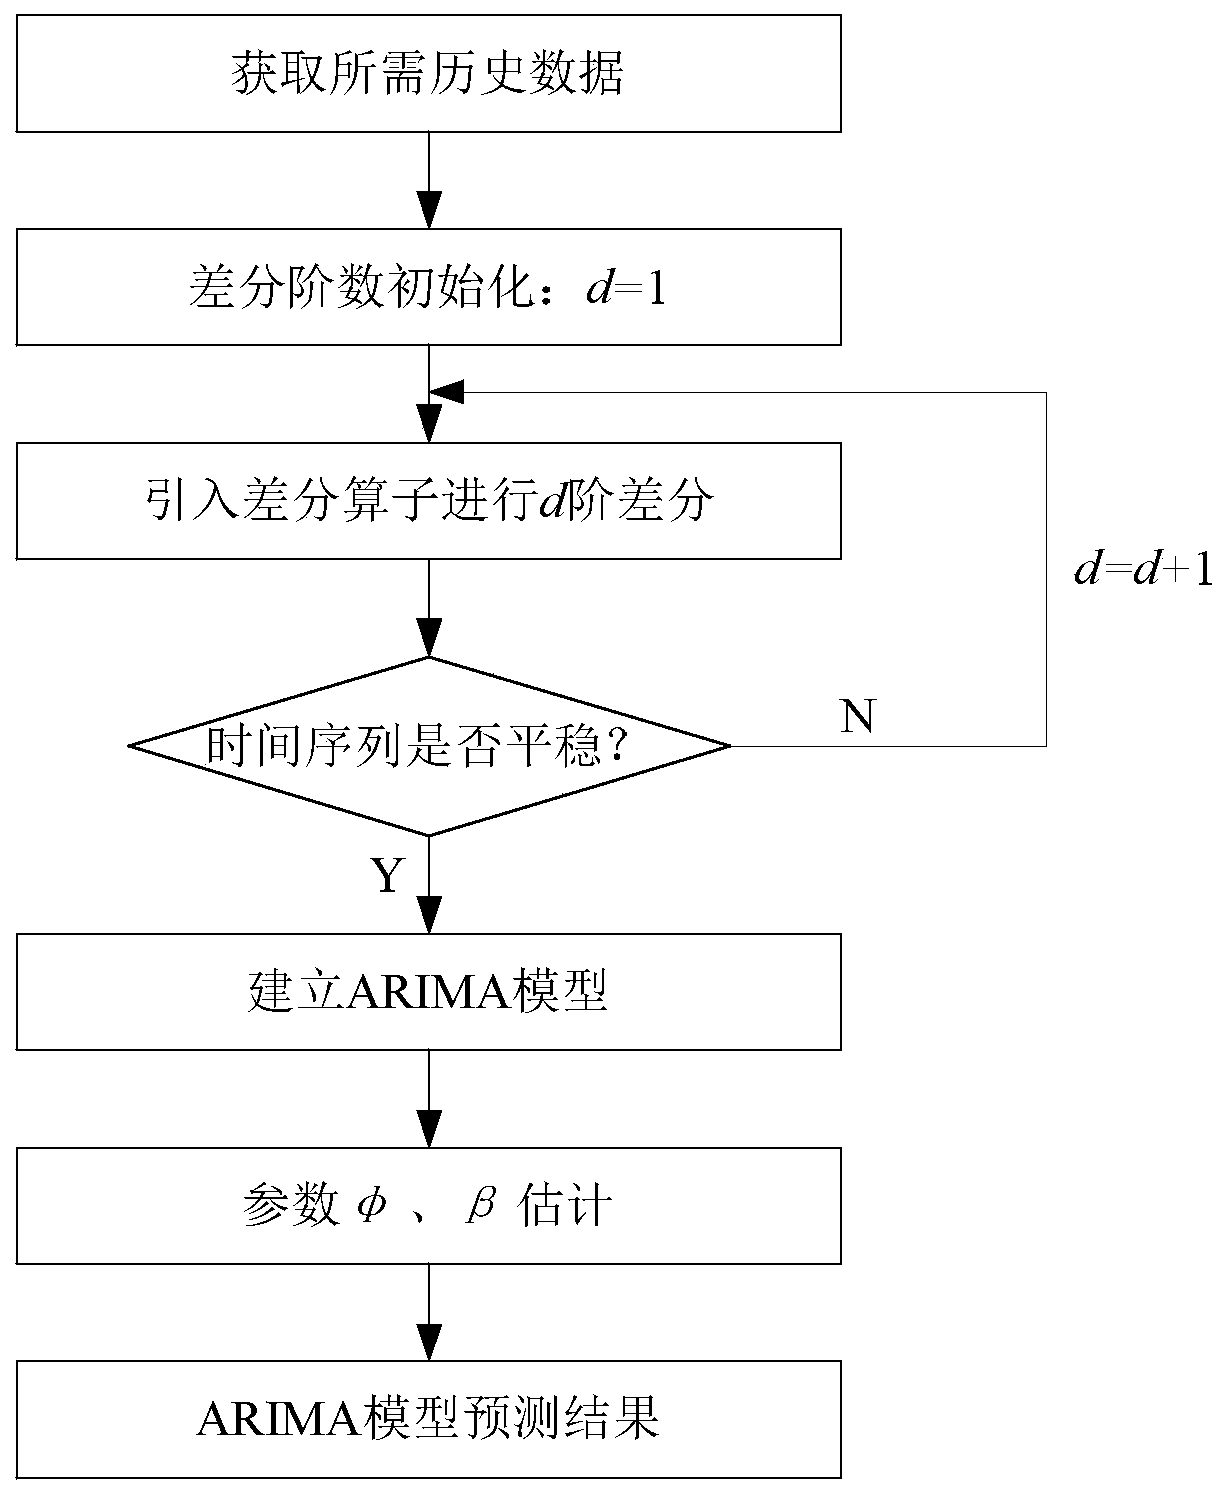 Combined prediction method for short-time travel requirements of online hailed car